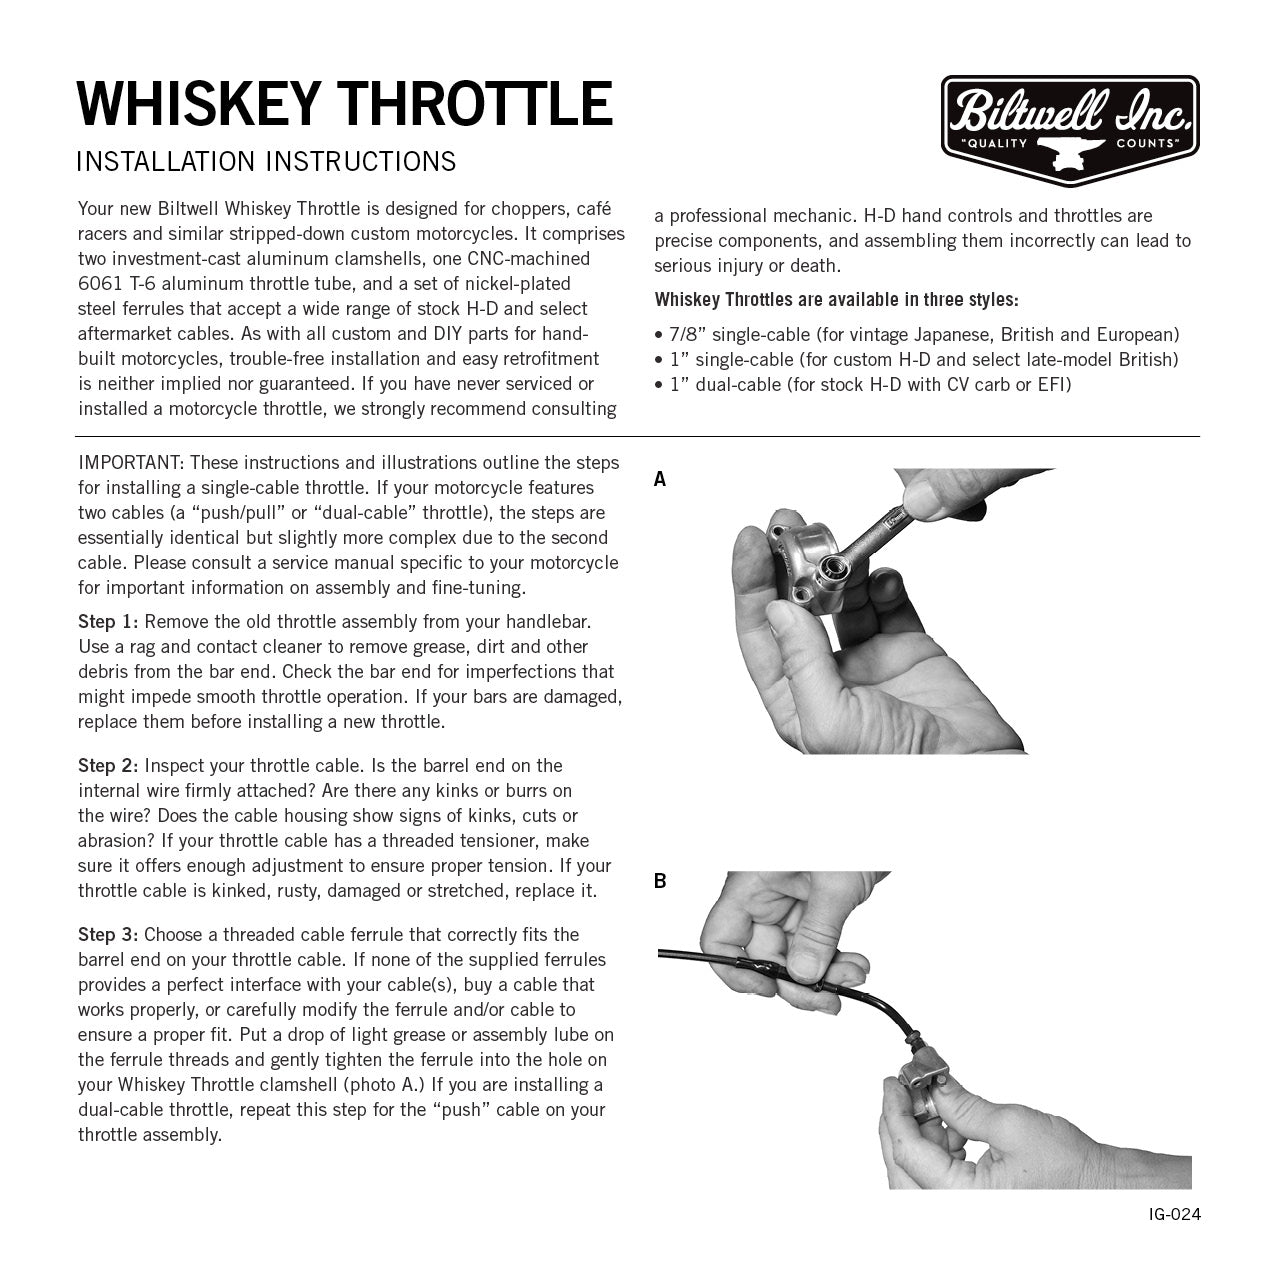 Cast Whiskey Throttle 1" Dual - Black Electroplate